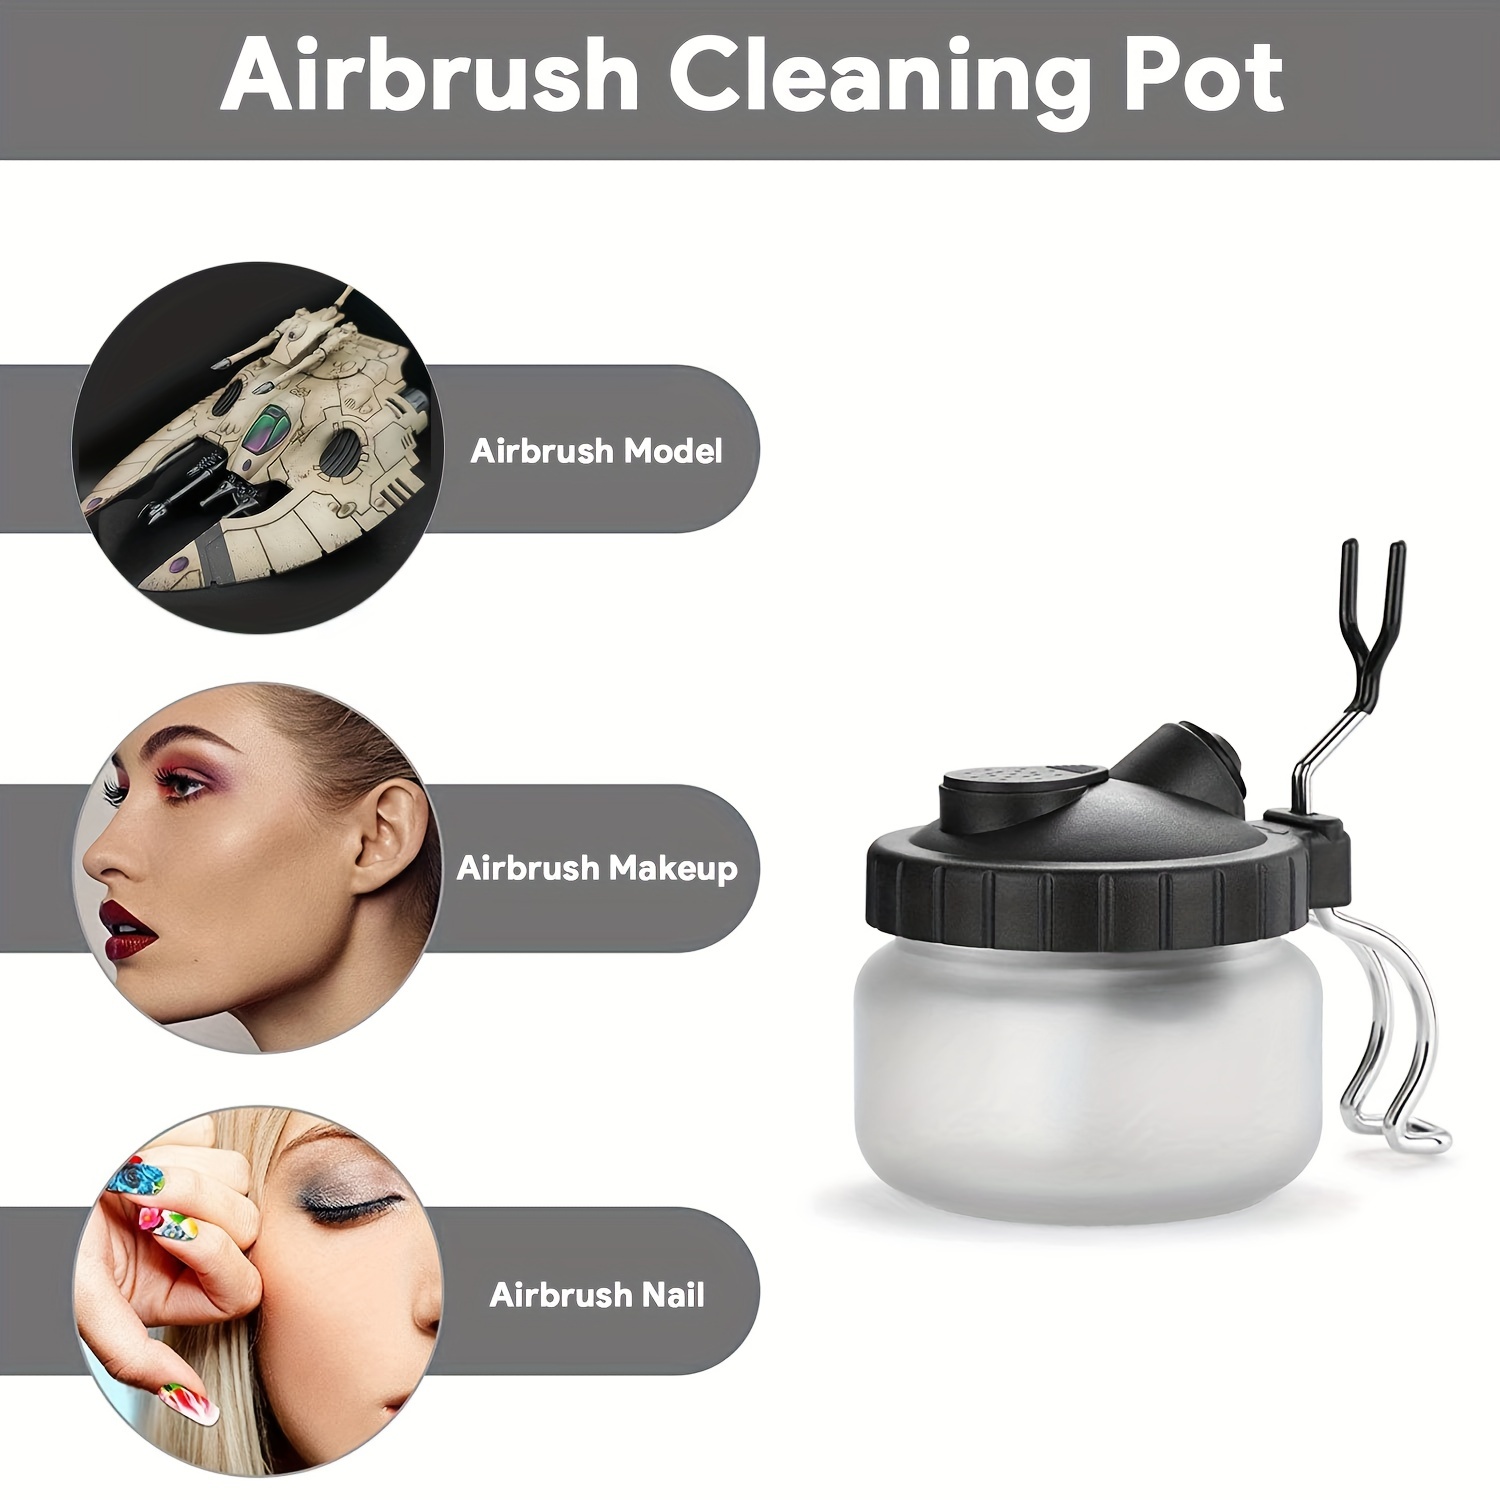 3D Printed Airbrush Cleanning Pot by hoangnam